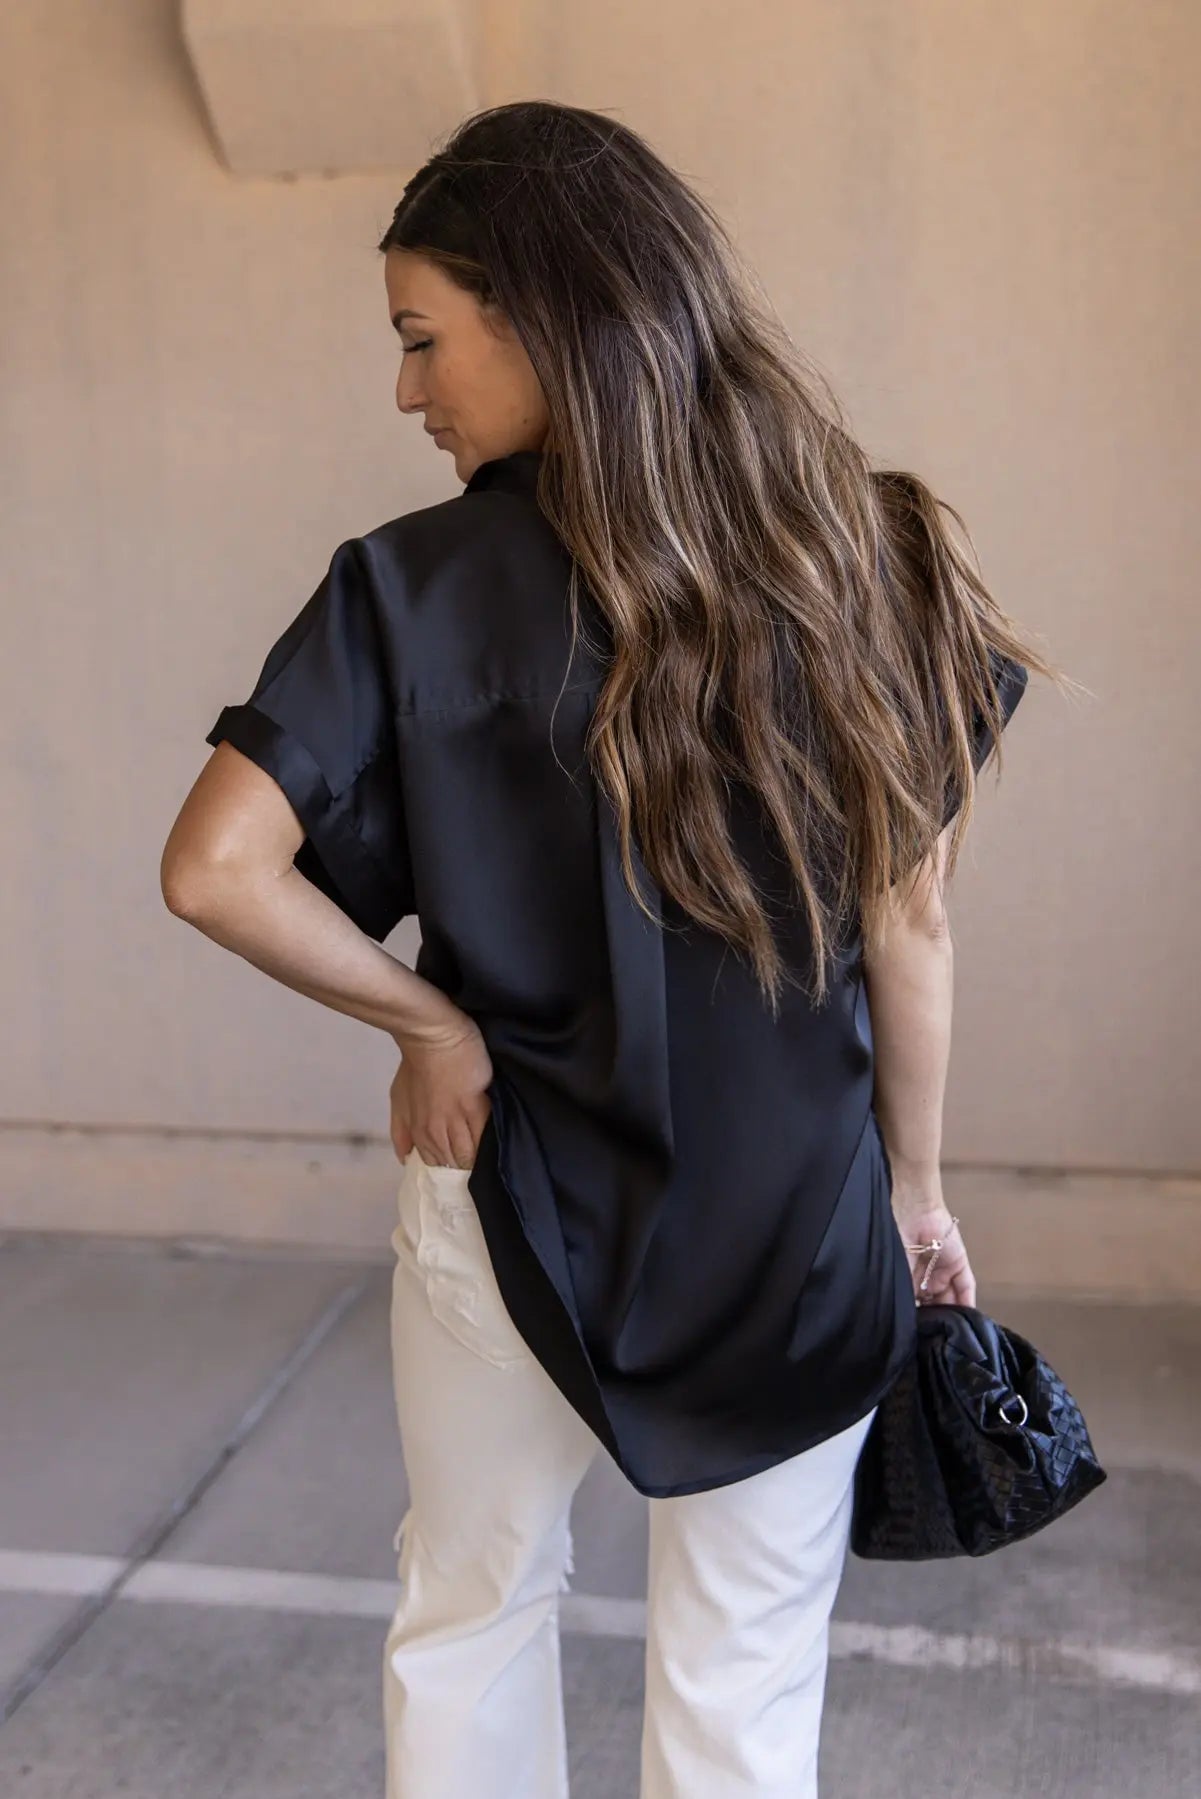 Over The Top Black Satin Top - FINAL SALE - JO+CO